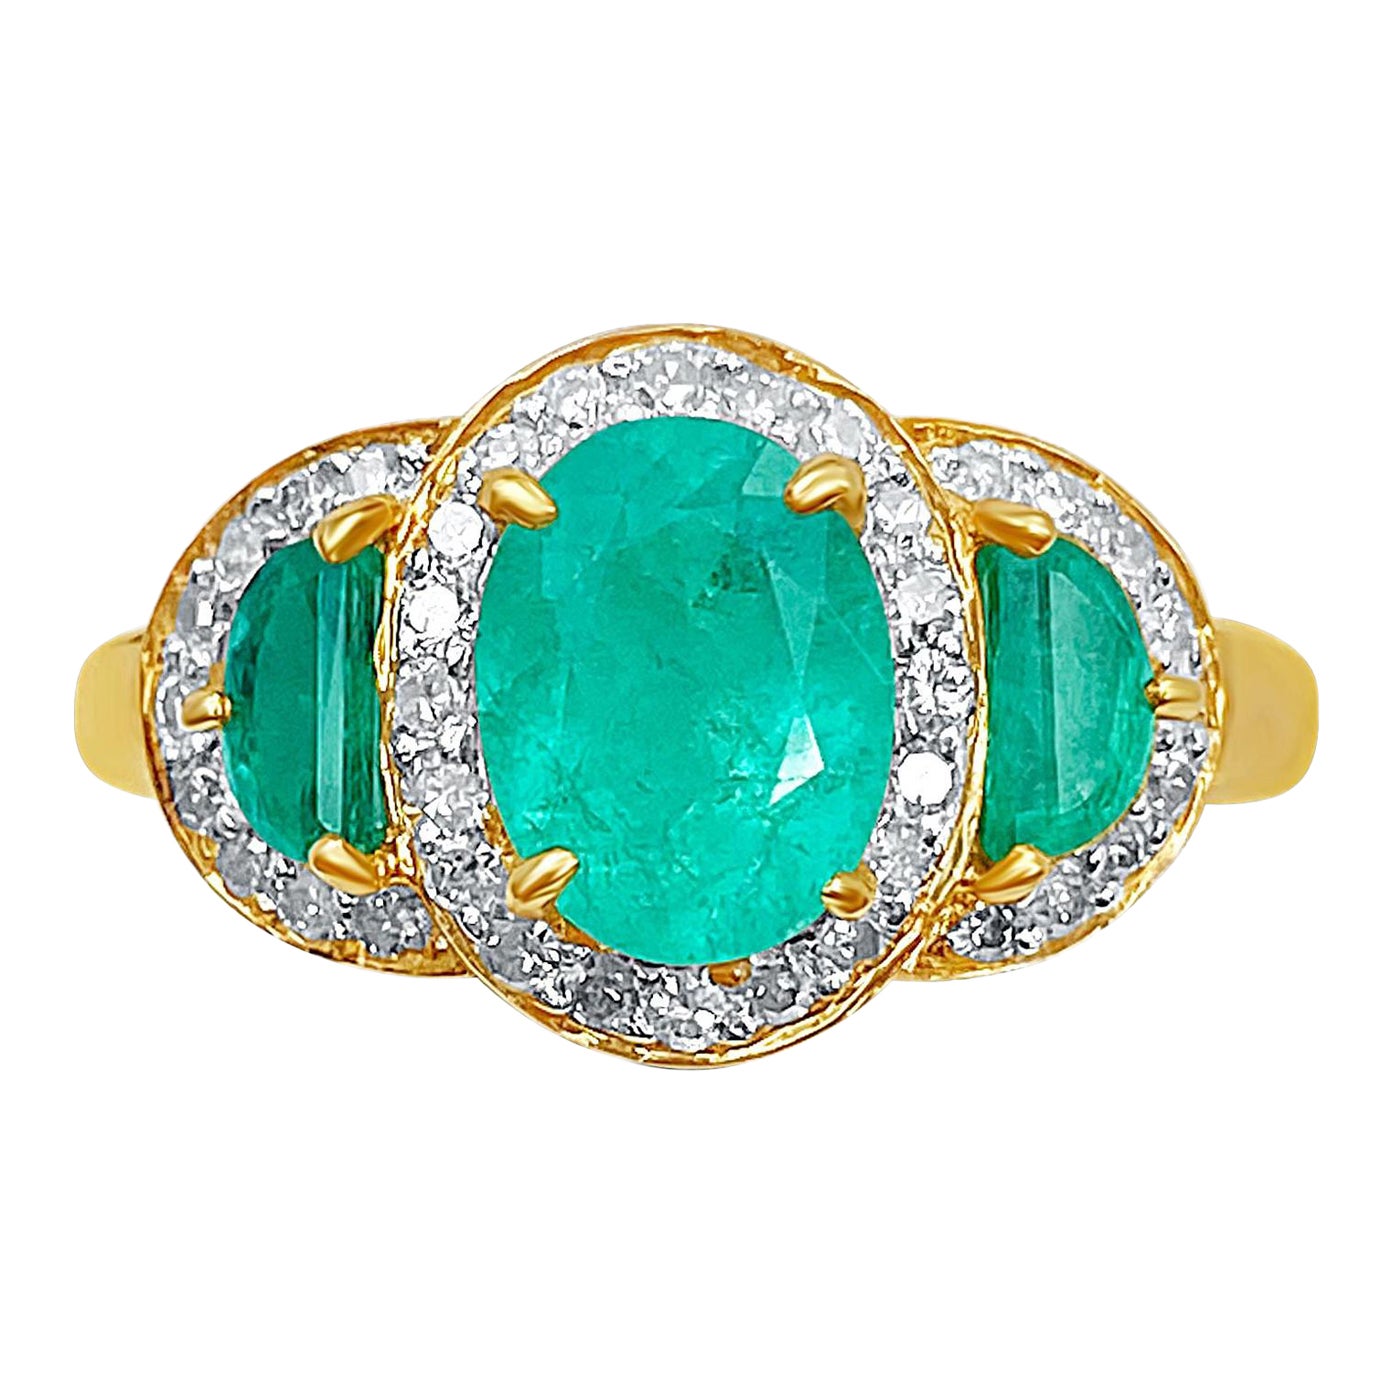 1.60 Carat Oval Cut Colombian Emerald, Diamond, and 18K Yellow Gold Ring